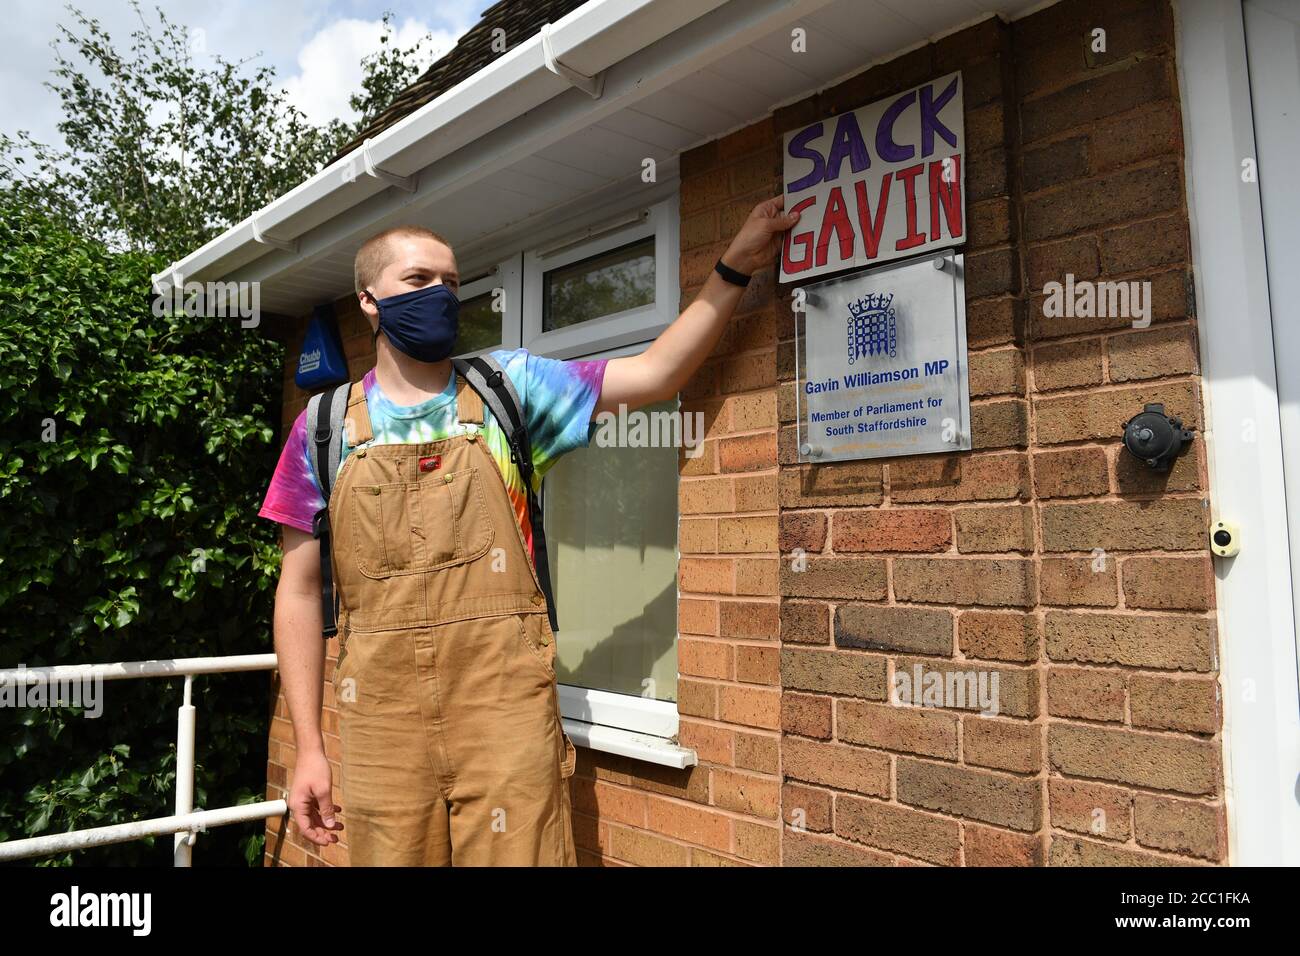 A student places a 'Sack Gavin' sign above the plaque at the constituency office of their local MP Gavin Williamson, who is also the Education Secretary, as part of a protest over the continuing issues of last week's A level results which saw some candidates receive lower-than-expected grades after their exams were cancelled due to coronavirus. Stock Photo